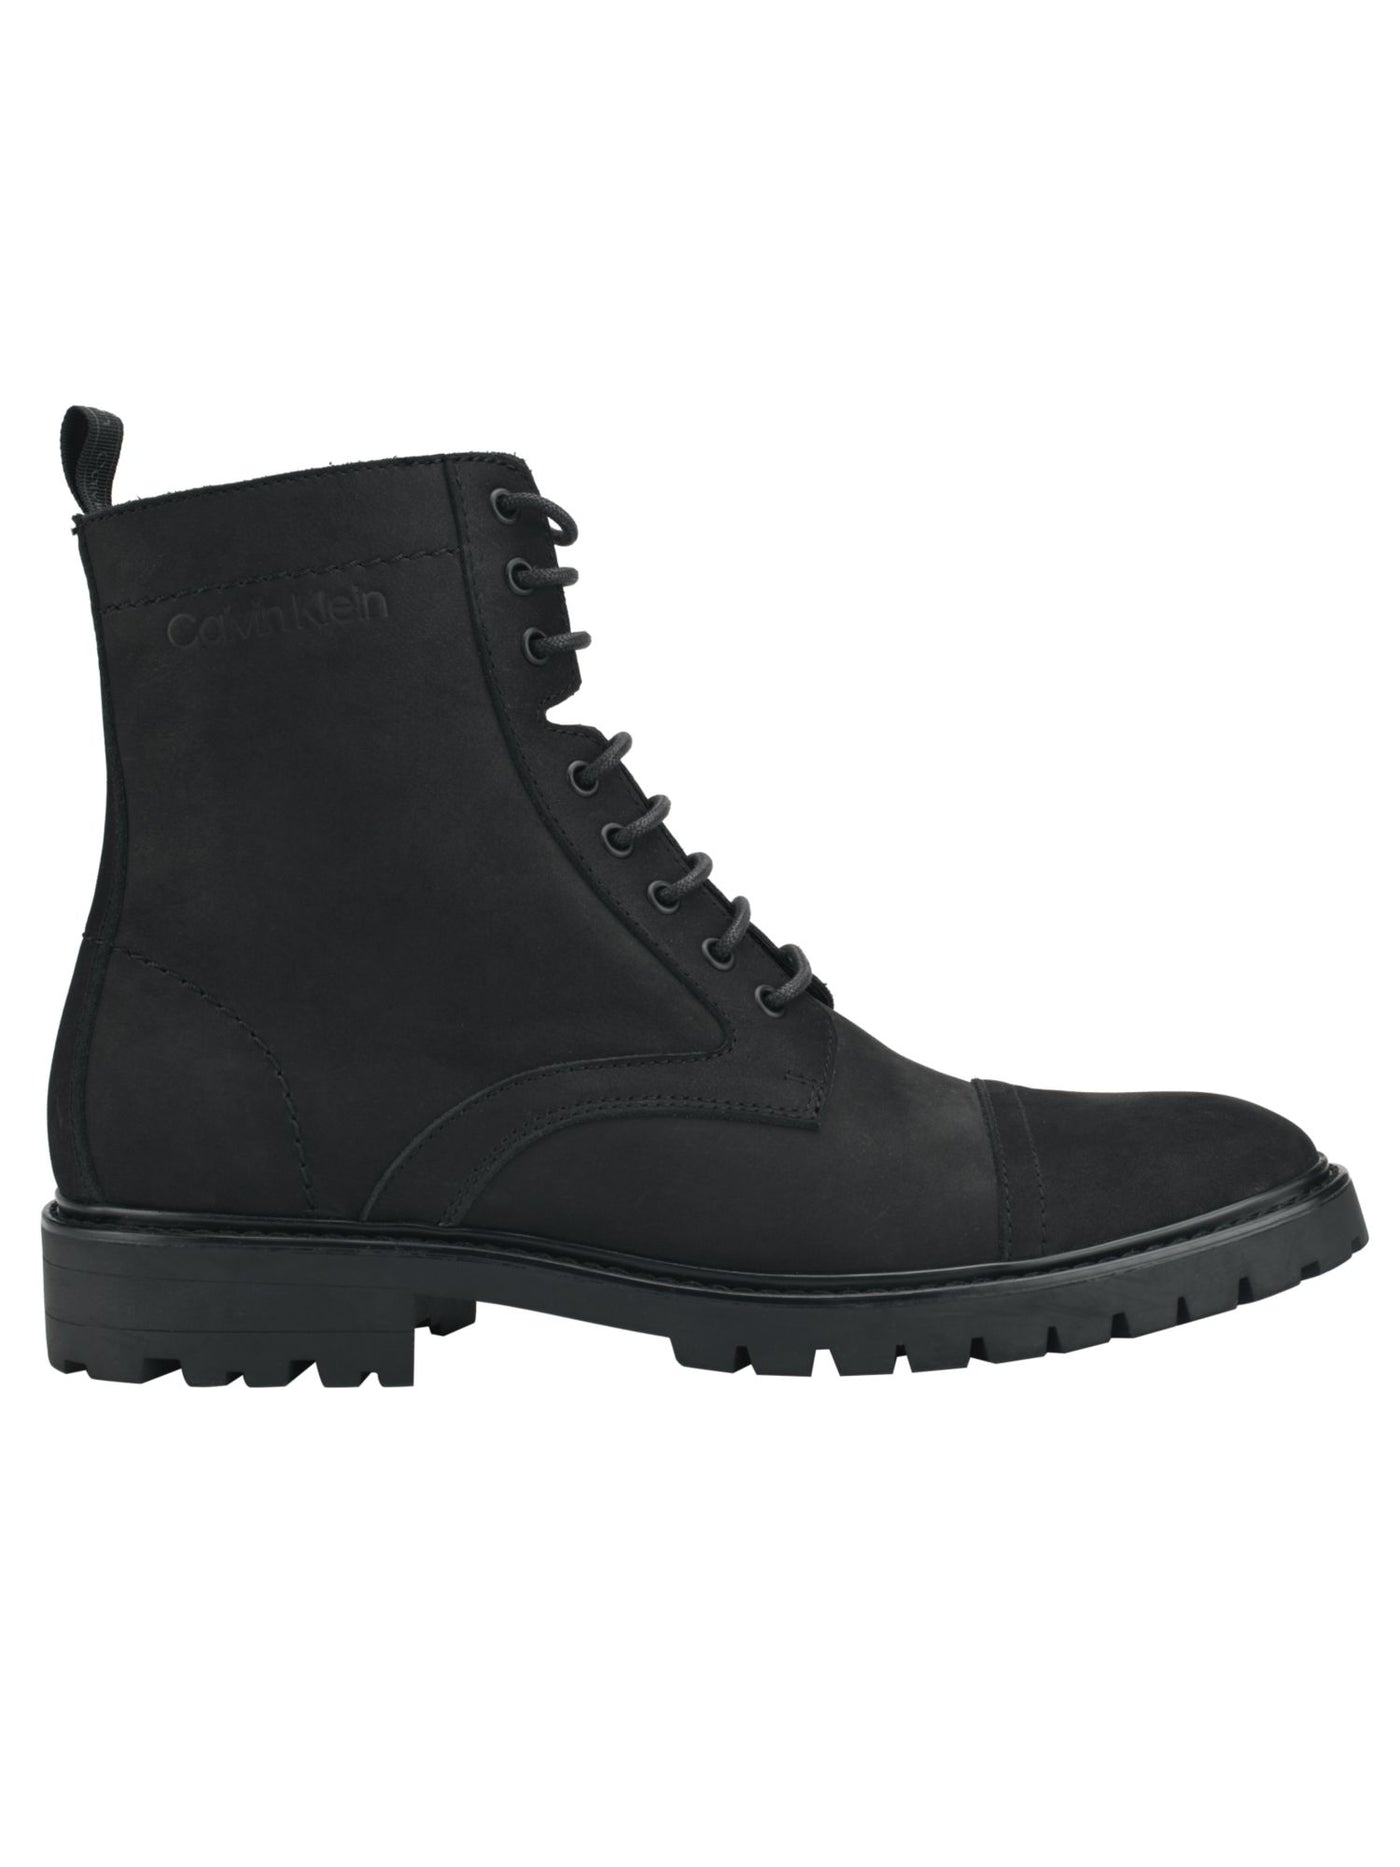 CALVIN KLEIN Mens Black Lug Sole Pull Tab Cushioned Removable Insole Lorenzo Round Toe Block Heel Lace-Up Boots Shoes 9 M